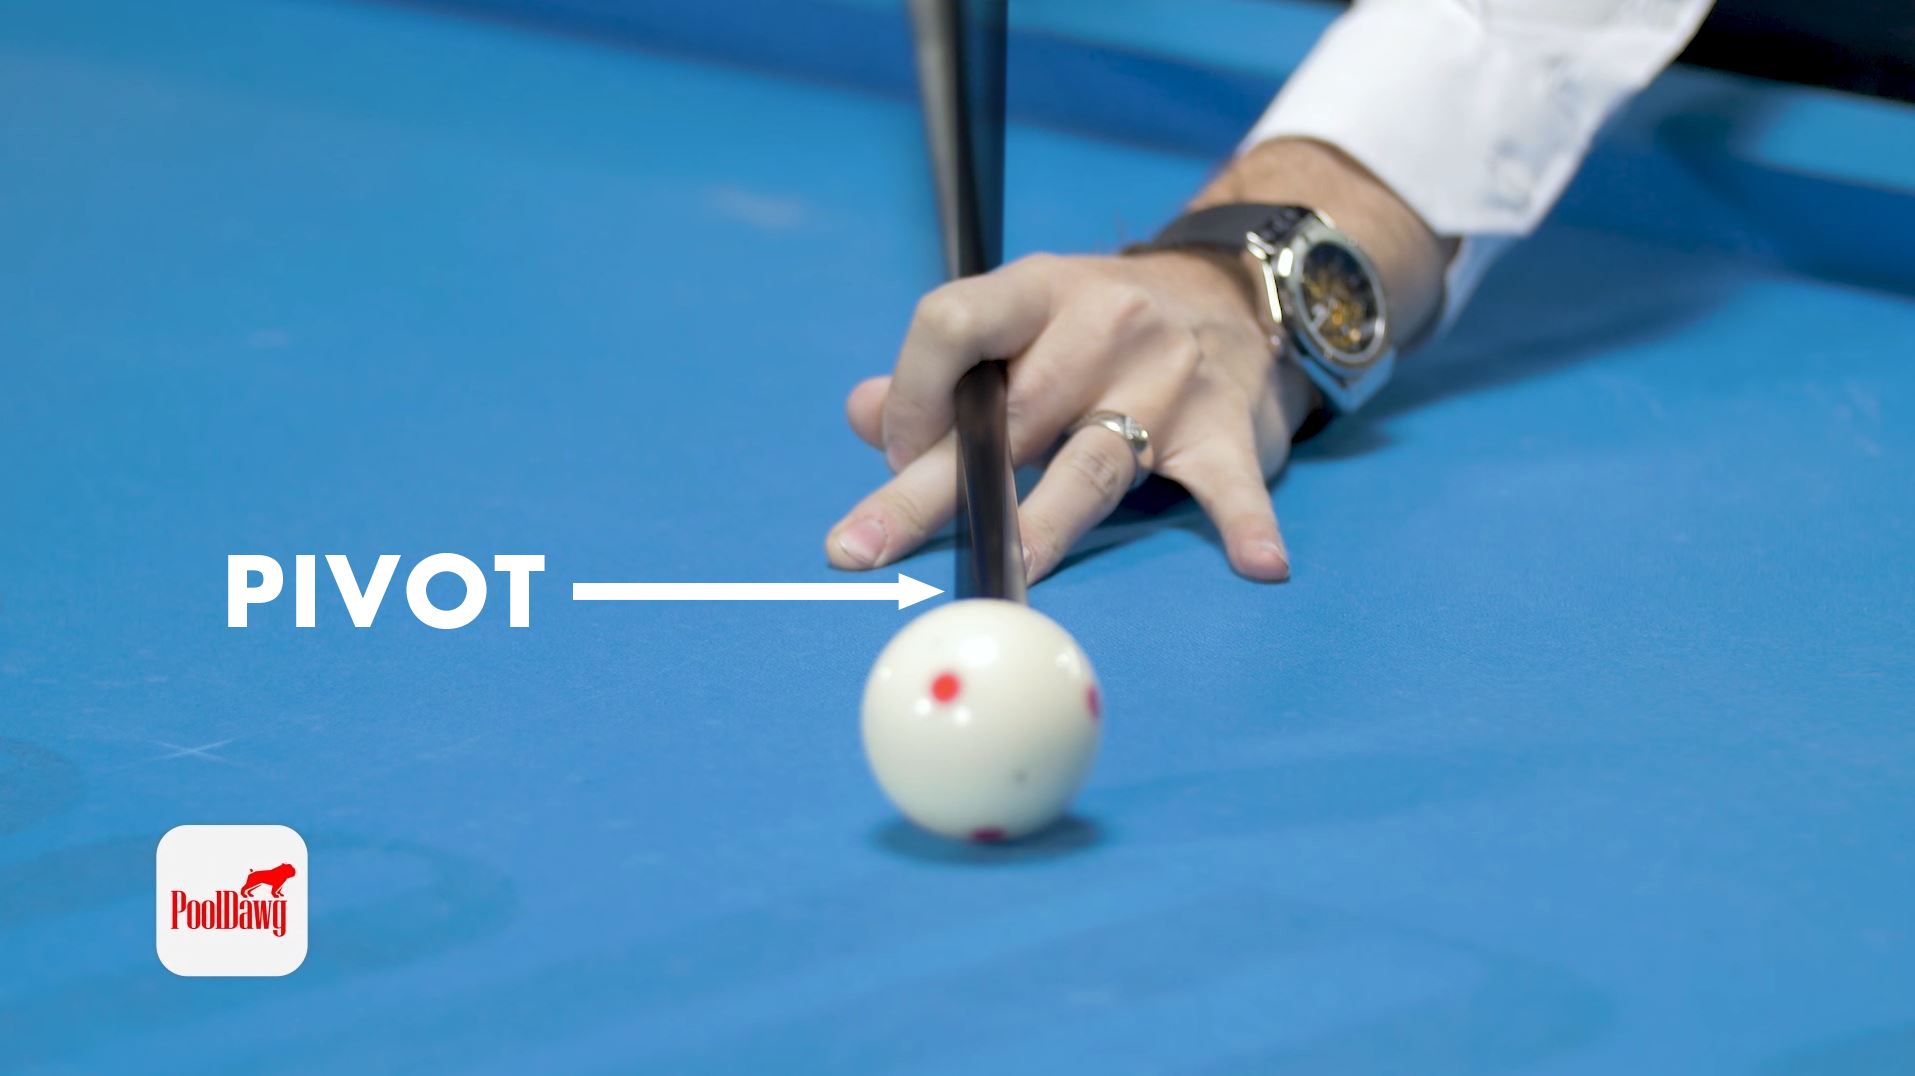 Florian lines up a left cut shot, planting his bridge hand with one tip of left English and then pivots with the back hand to align the tip to the center of the cue ball.